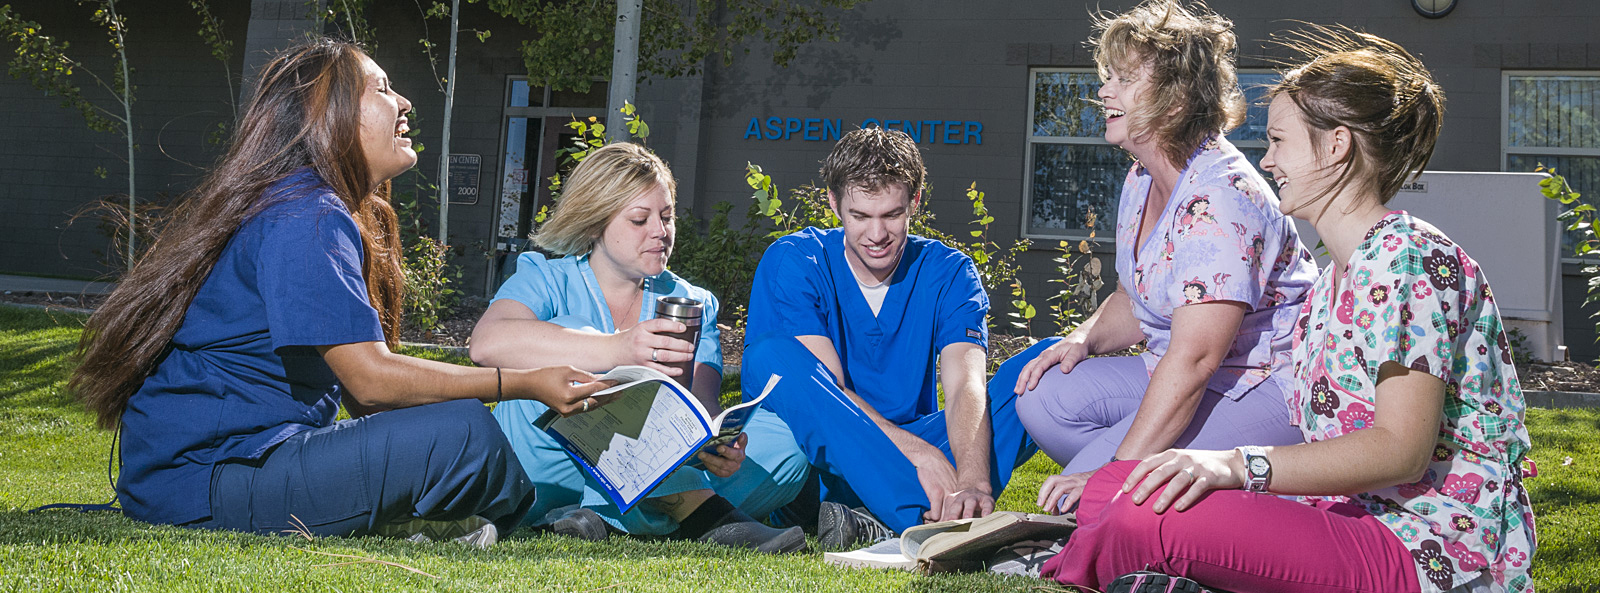 Healthcare students sitting on campus lawn